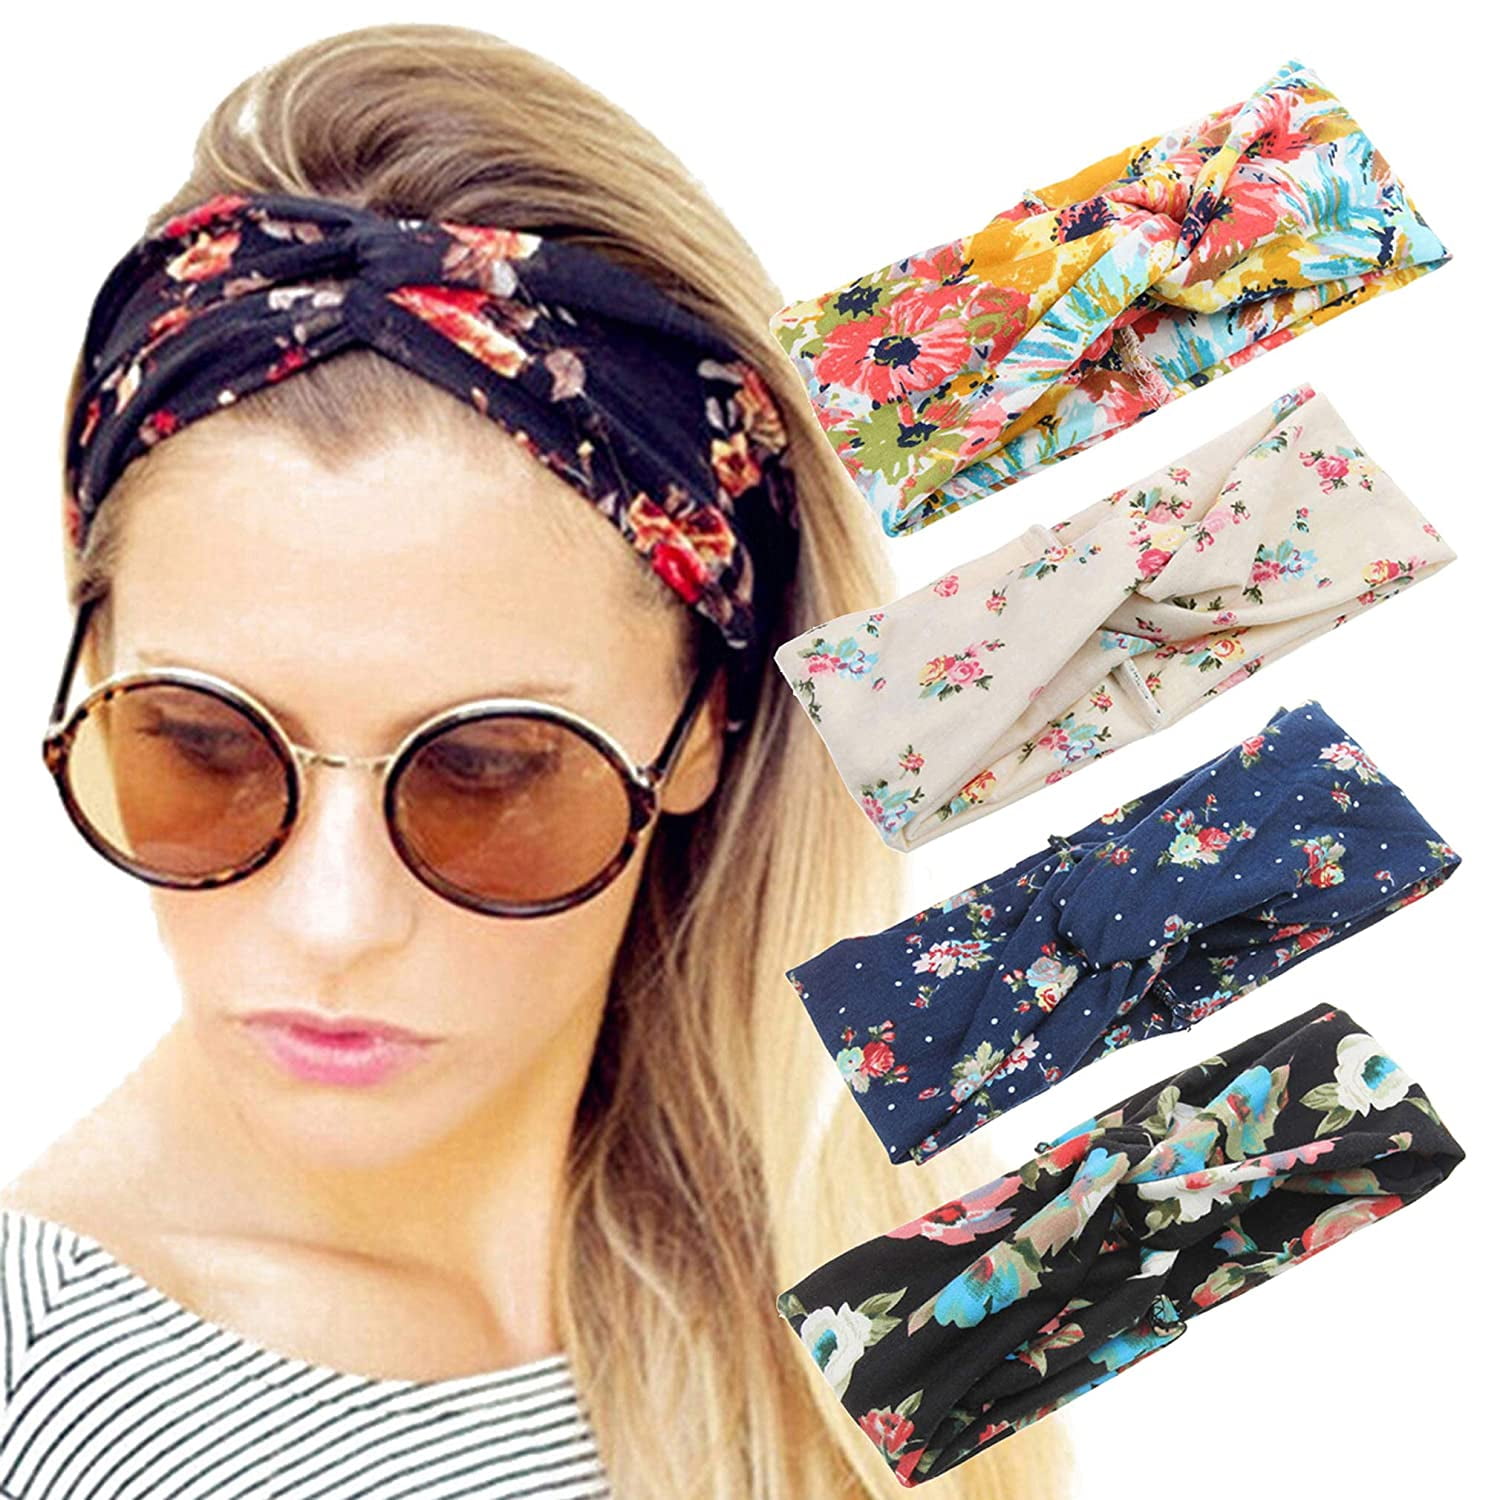 VULKIT Headbands for Women 2Pcs Hairband for Cycling Yoga Face Cleaning Exercise Fitness Unisex Elastic Sports Headbands Workout Sweatband Head Wrap 